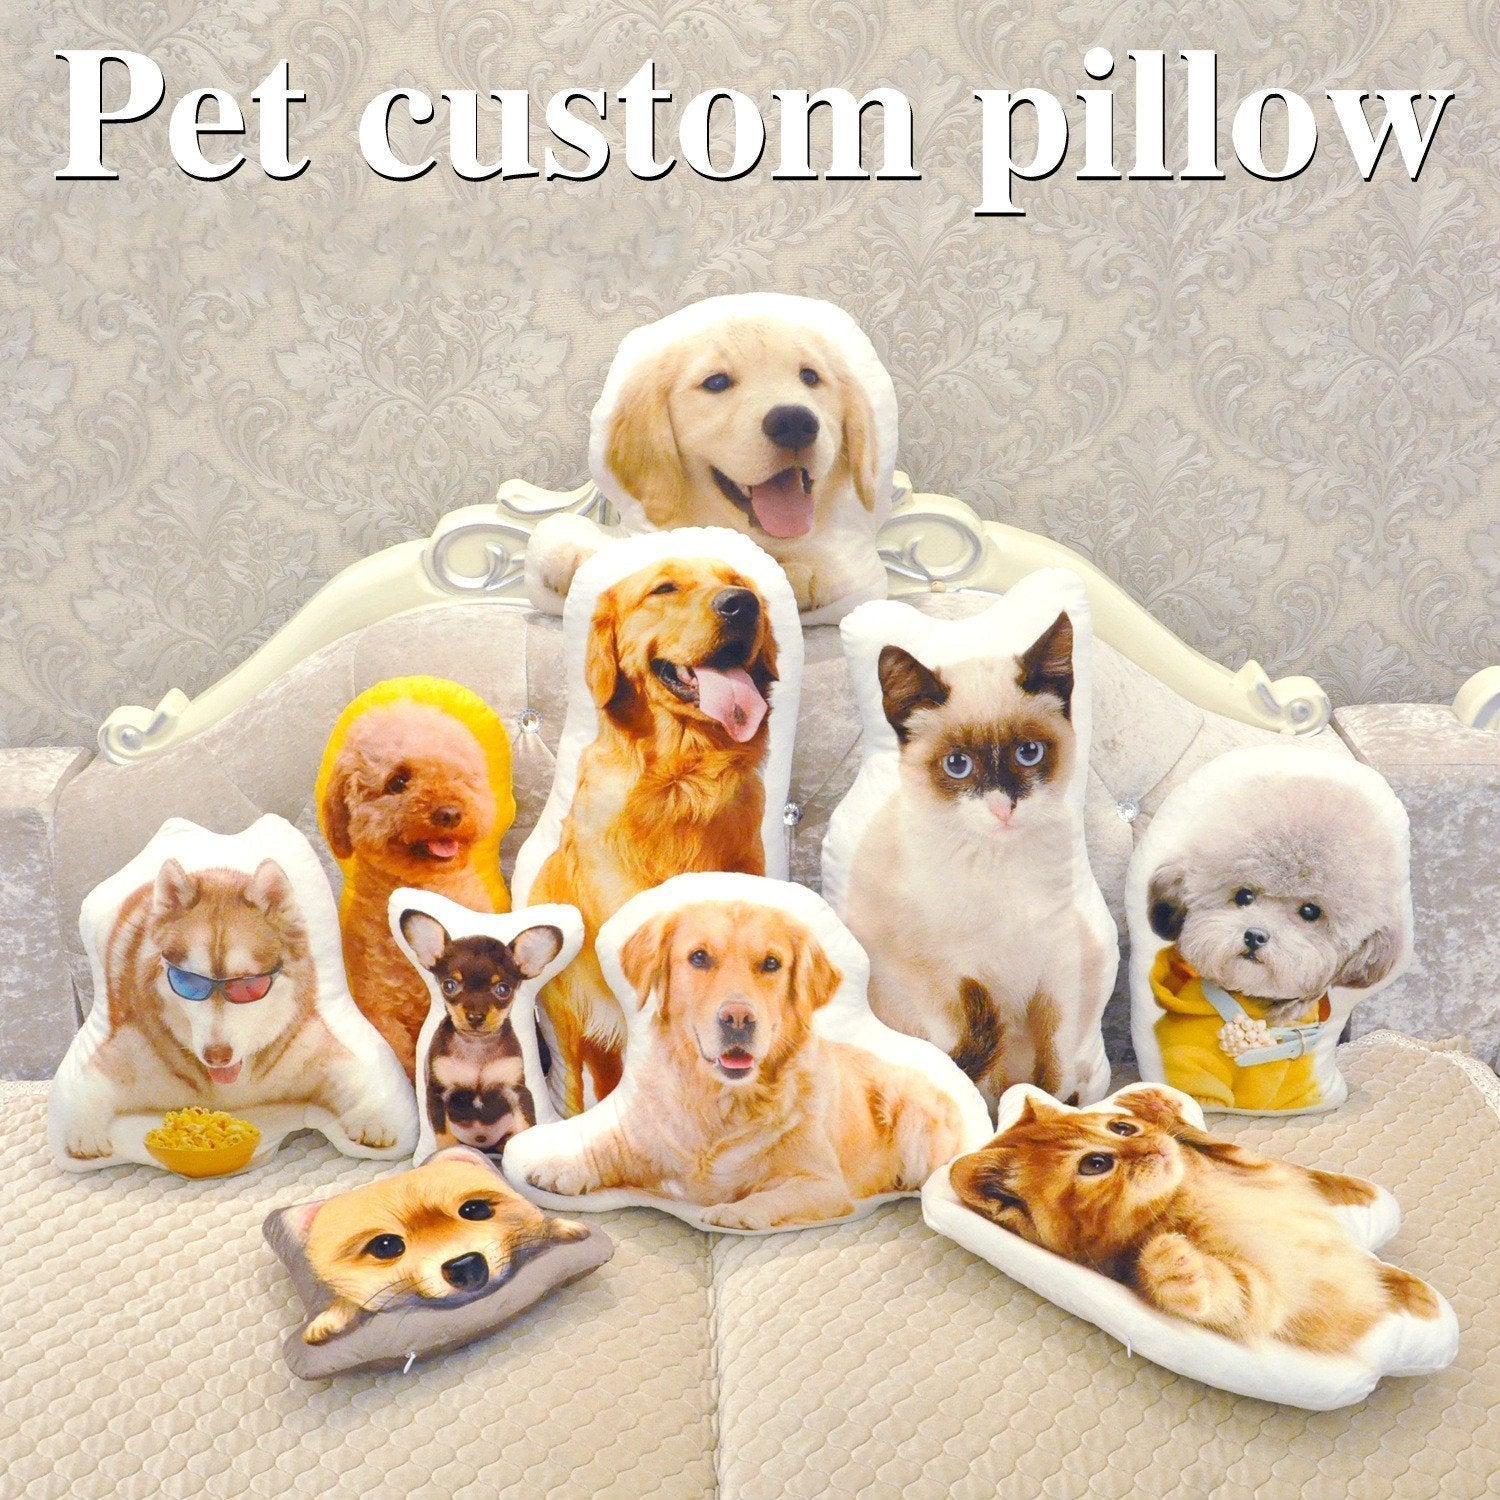 Personalized Custom Pillow!